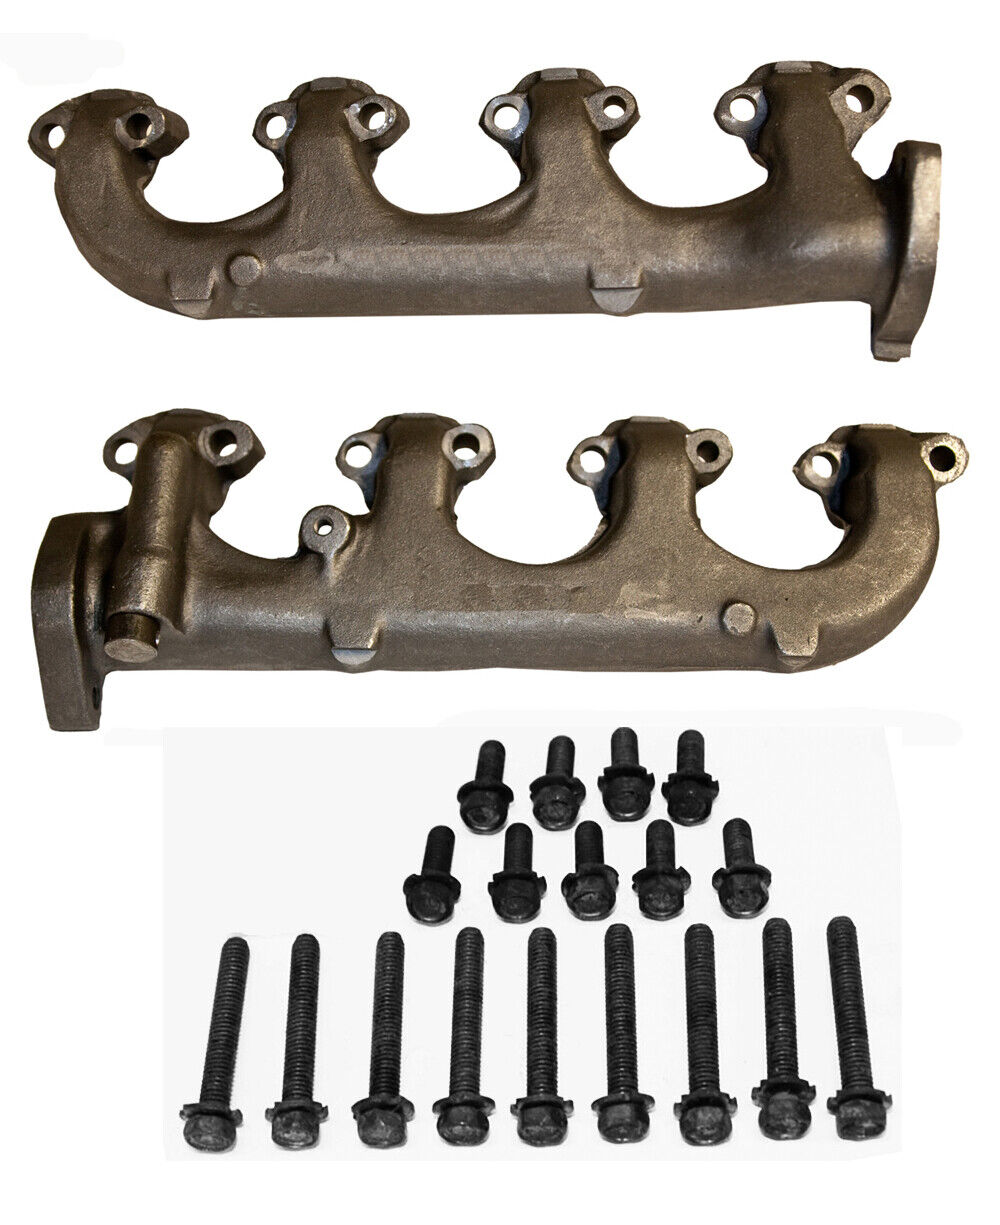 New 1965 - 1970 Ford Mustang Exhaust Manifolds Pair 260 289 302 With Hardware